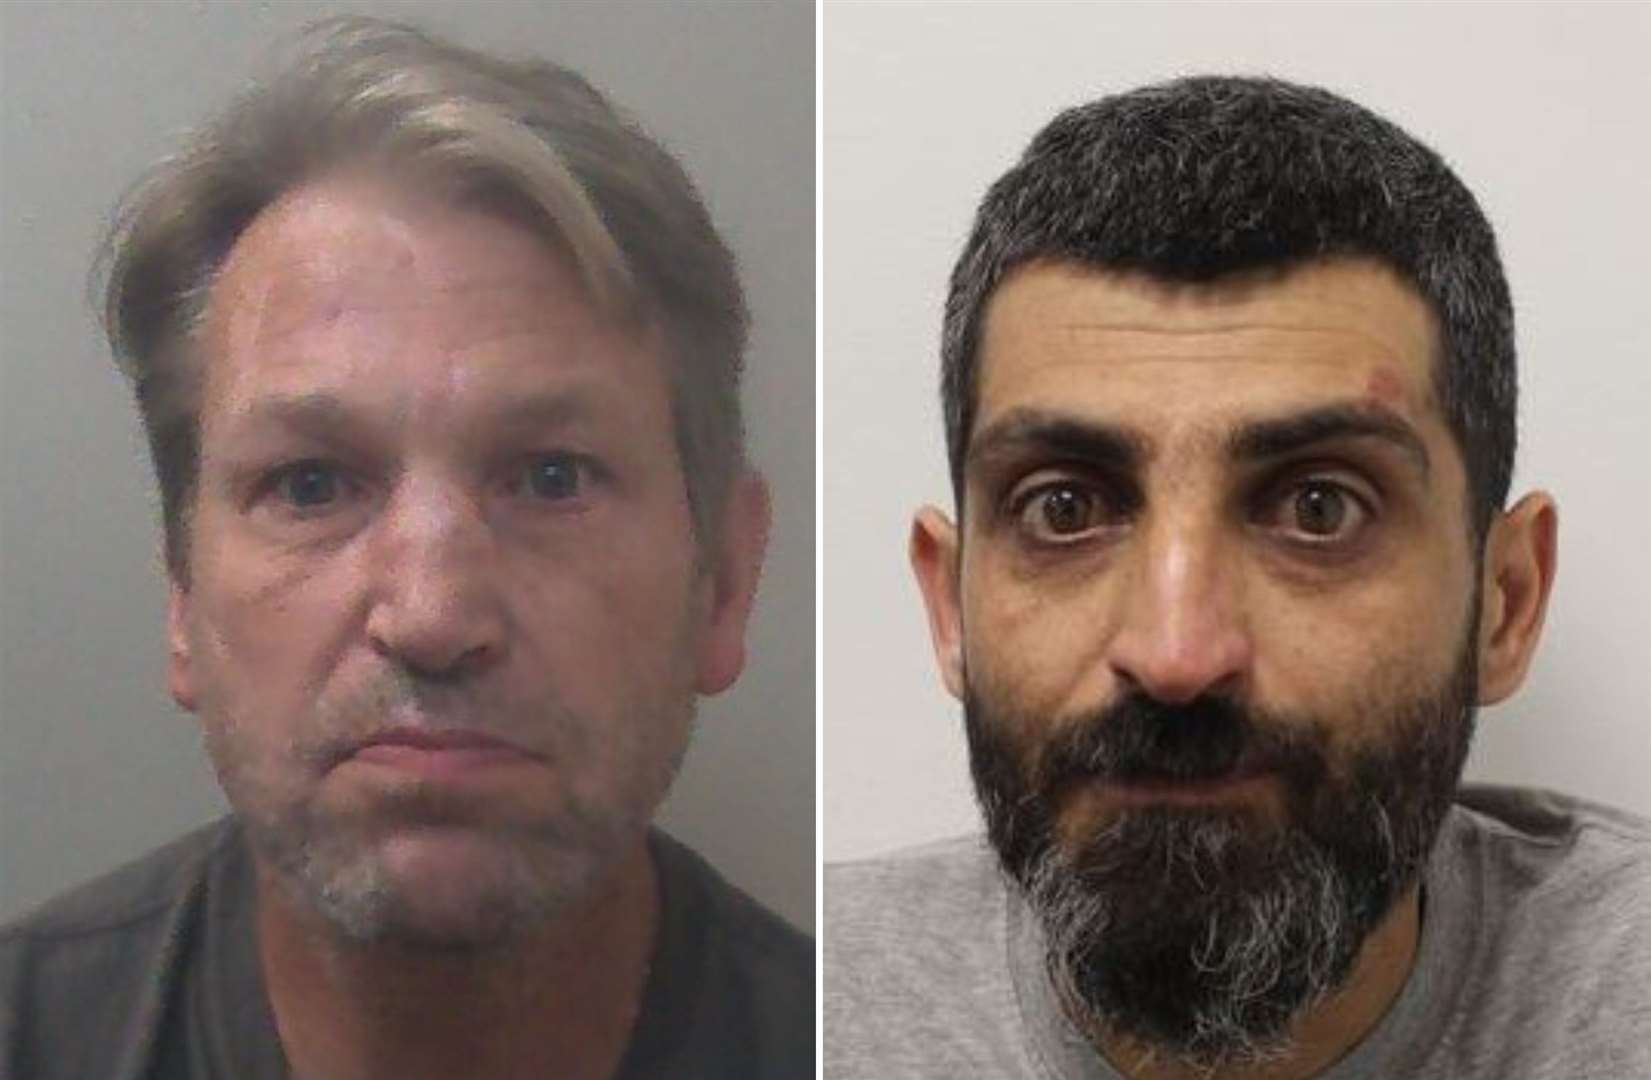 Robert Reading, 50, from Rochester (left) and Mojtab Moradi, 37, from Plumstead (right) have been jailed for possession of a firearm. Picture: National Crime Agency